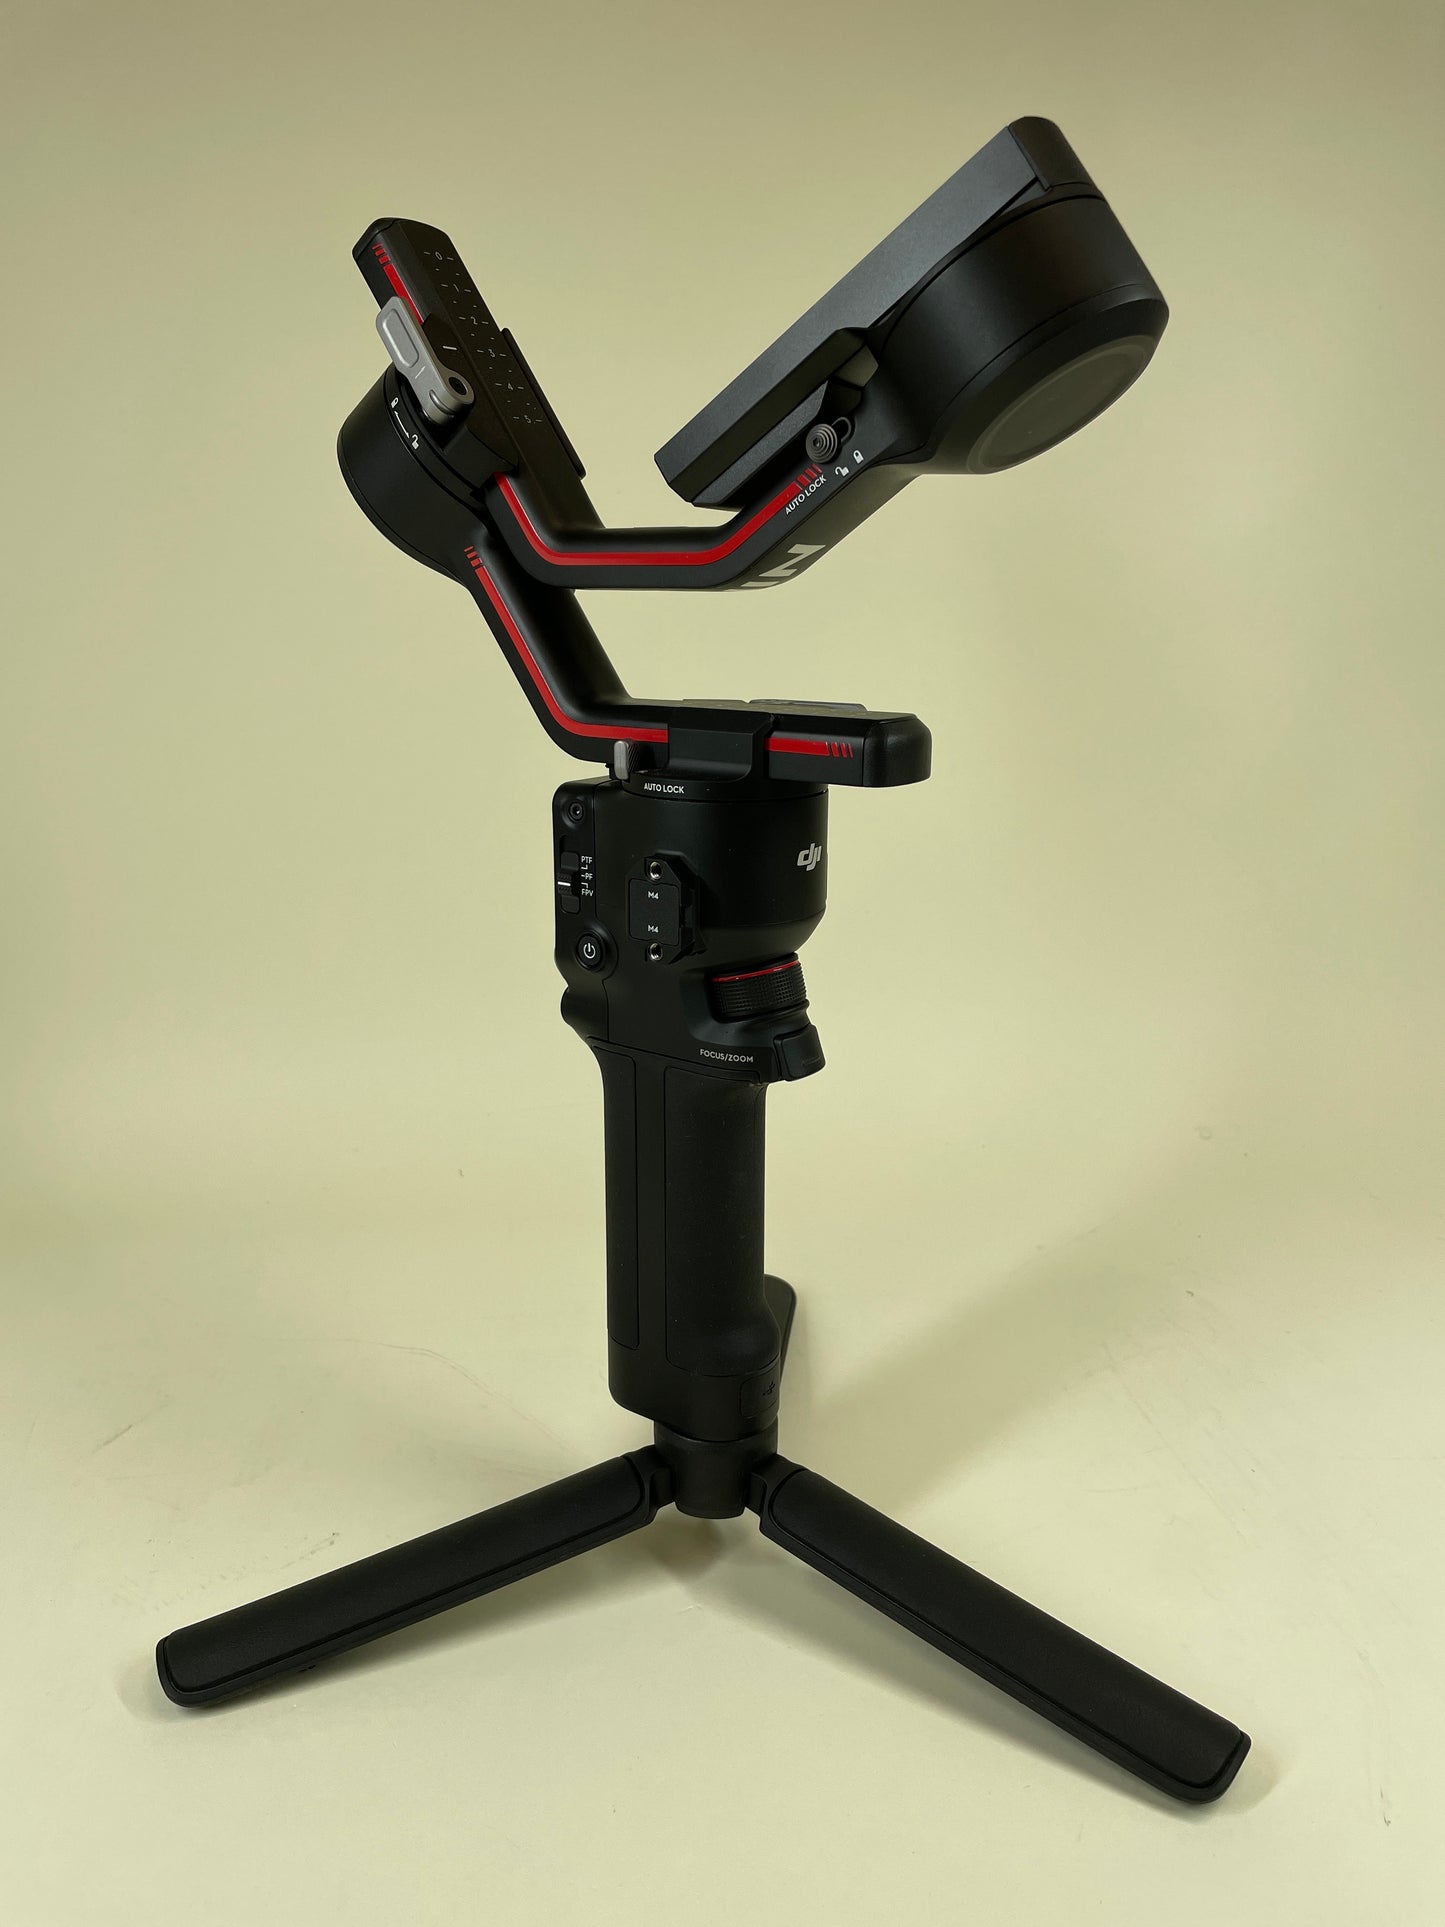 DJI RS3 Professional 3-axis Camera Stabilizer